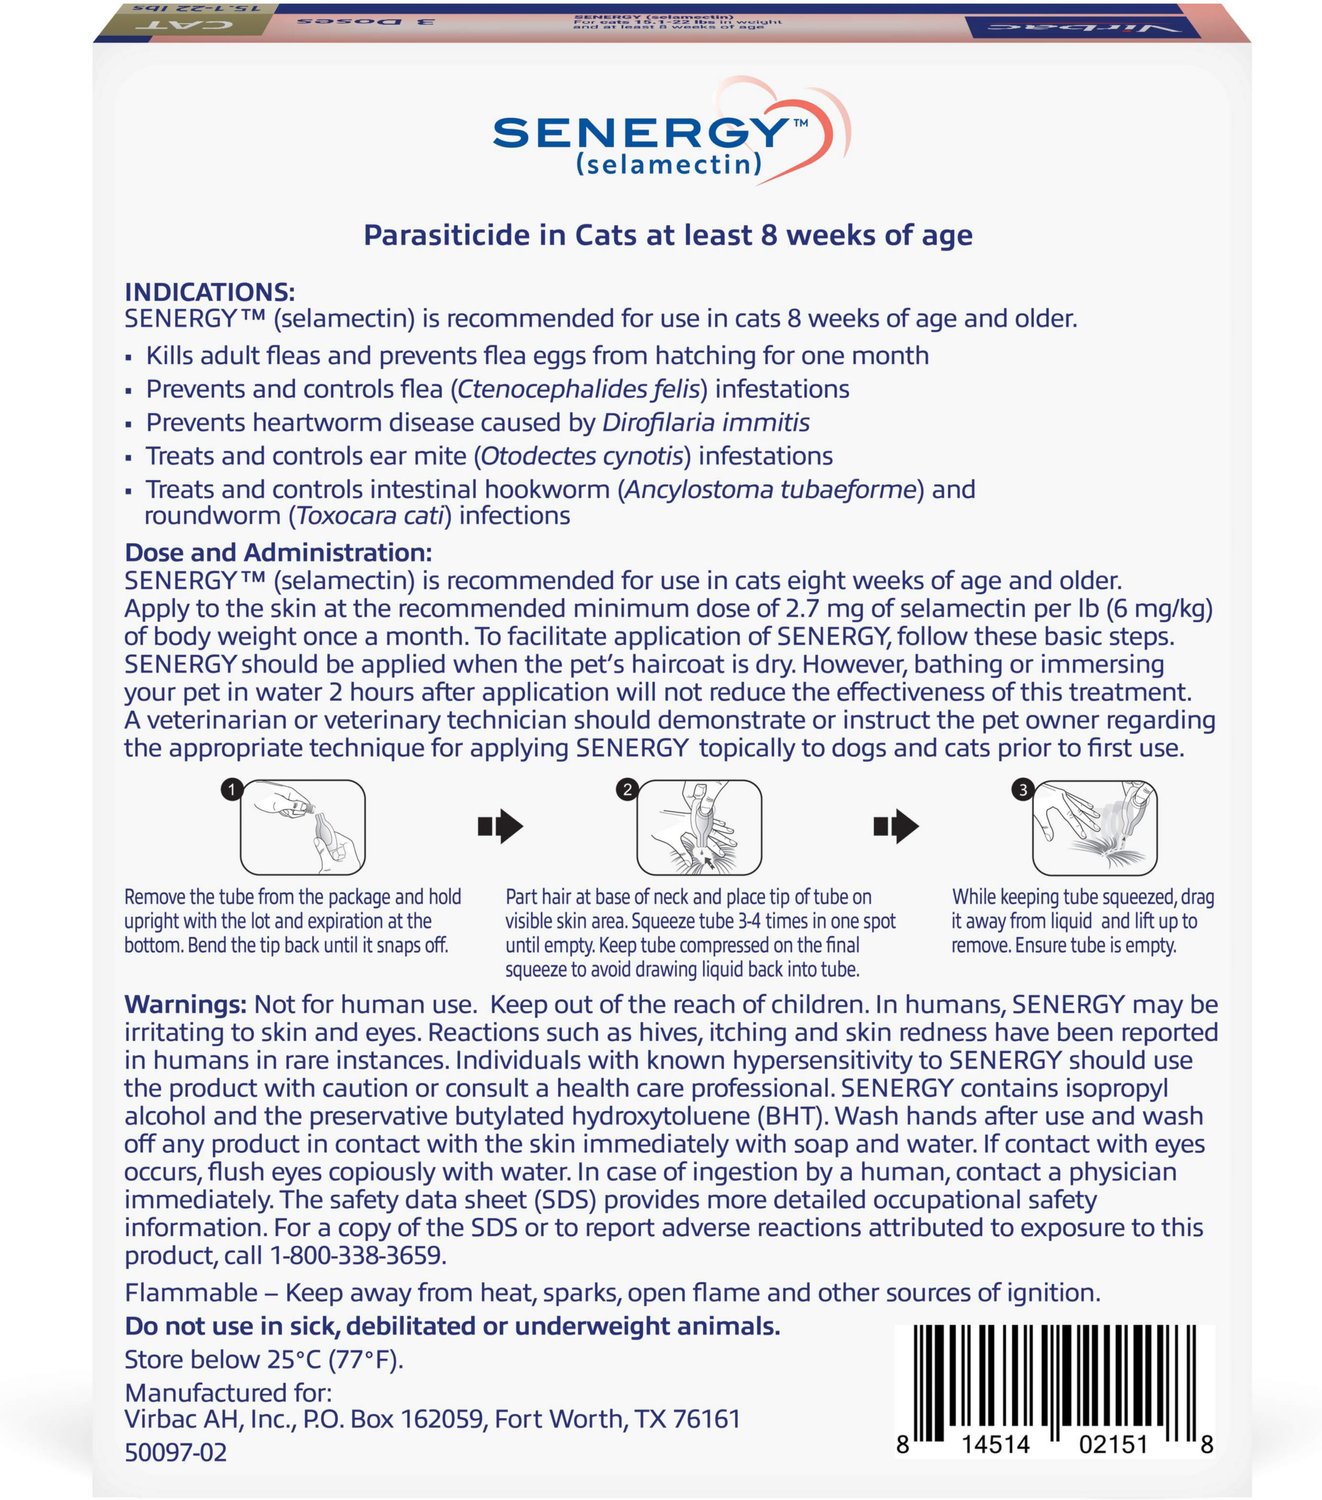 SENERGY Topical Solution for Cats,15.122 lbs, (Taupe Box), 3 Doses (3